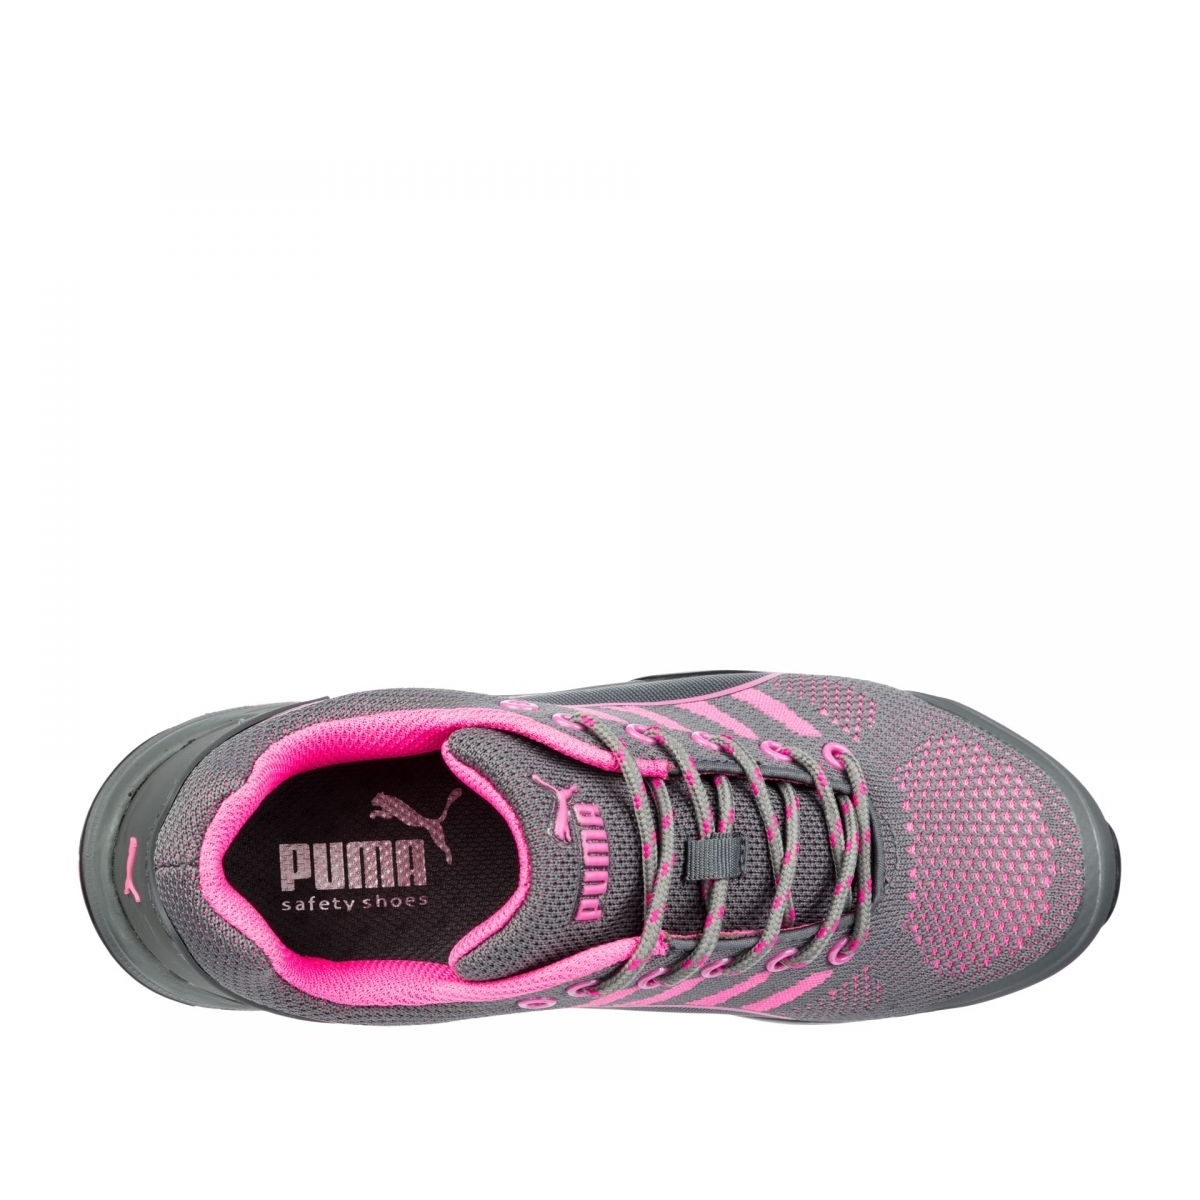 PUMA Safety Women's Celerity Knit Low Steel Toe ESD Work Shoe Pink - 642915 ONE SIZE PINK - PINK, 9.5